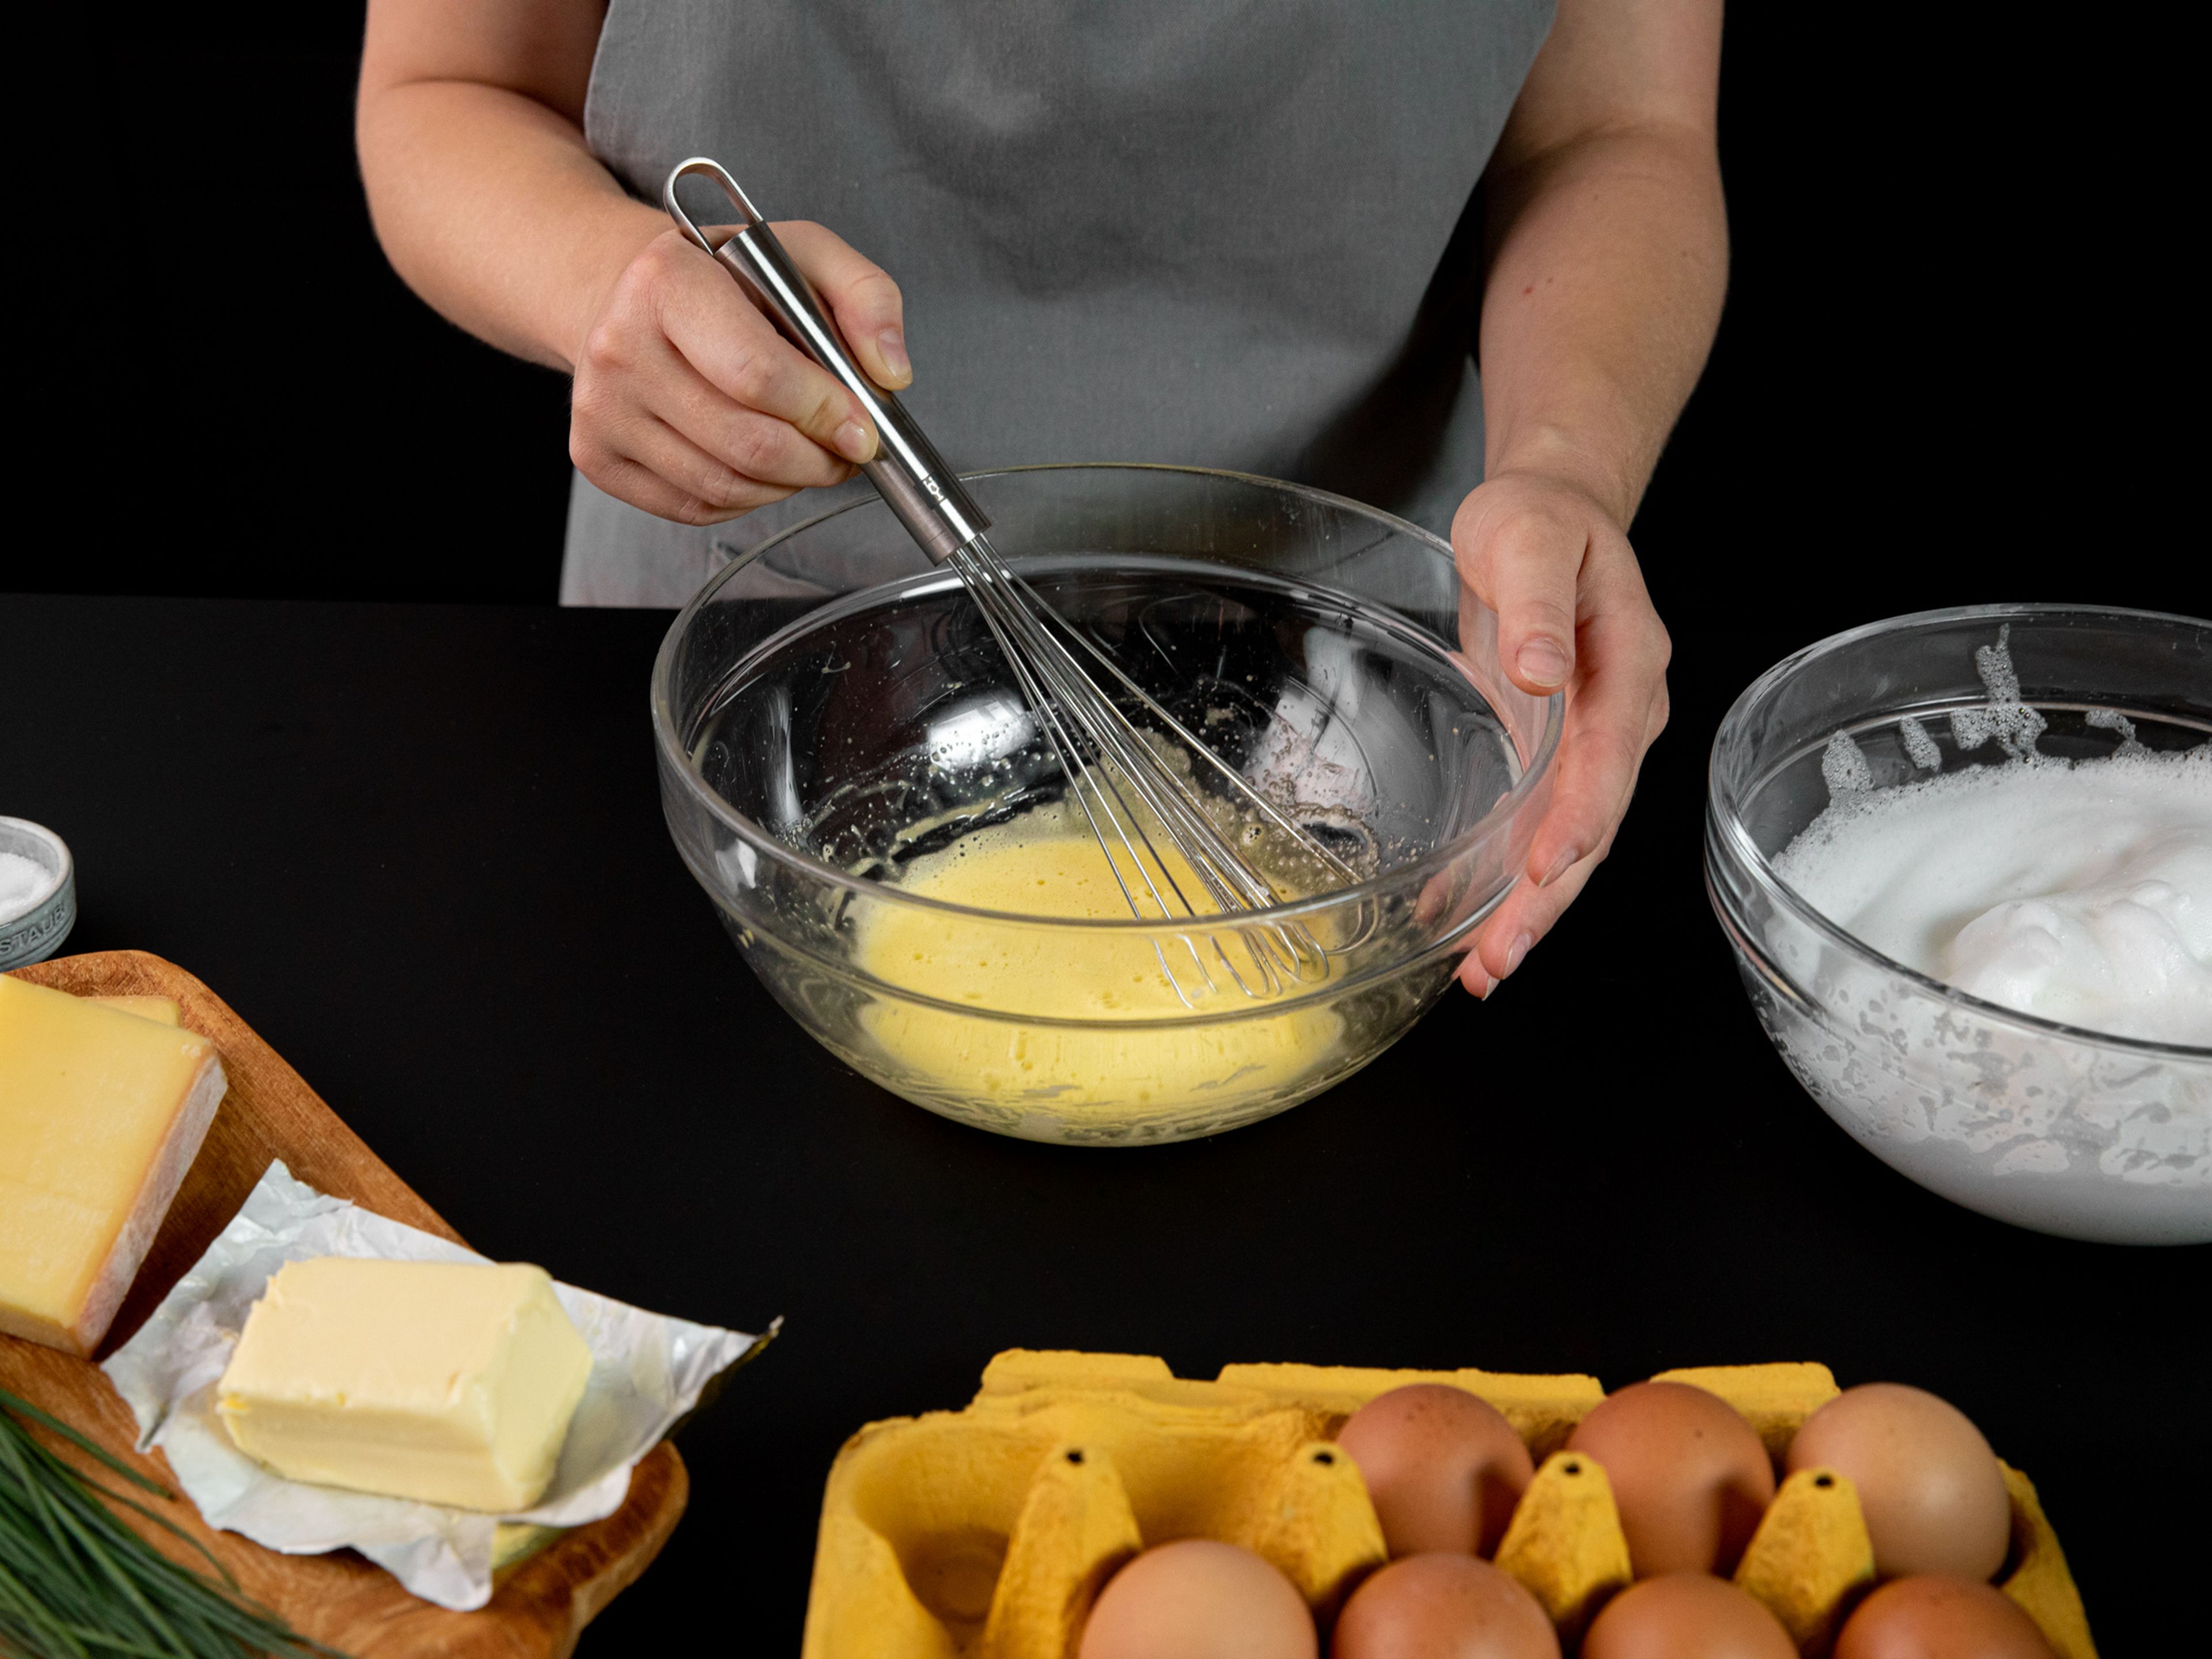 Separate the eggs, adding the yolks to a small bowl and the whites to a separate small bowl. Season the egg whites with salt and whisk to stiff peaks. Whisk the egg yolks until well combined.